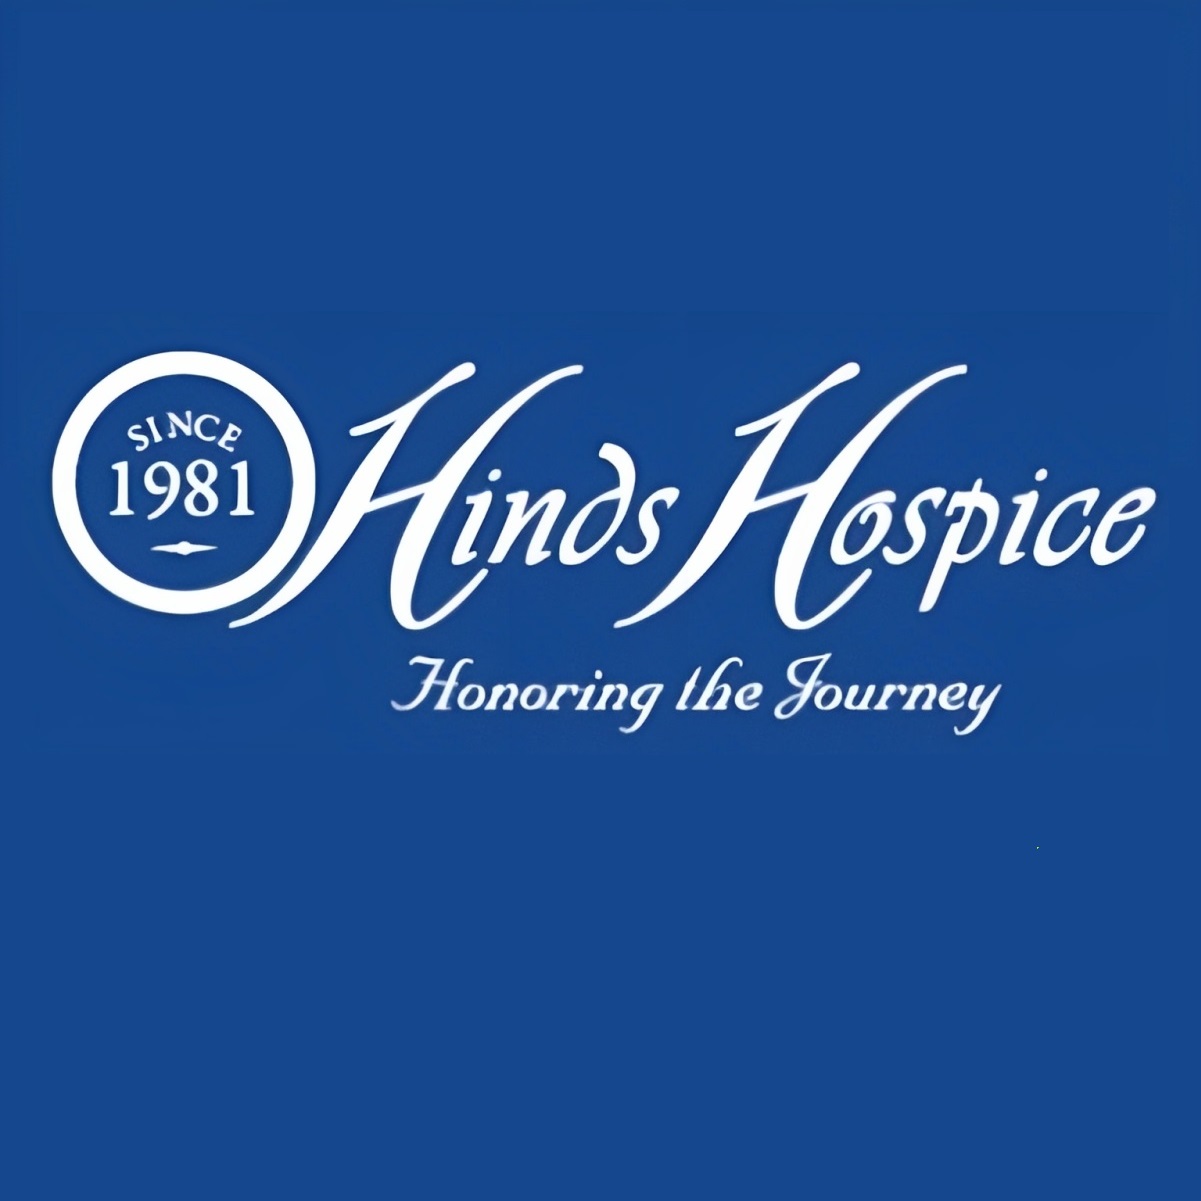 hinds hospice | home health care in merced